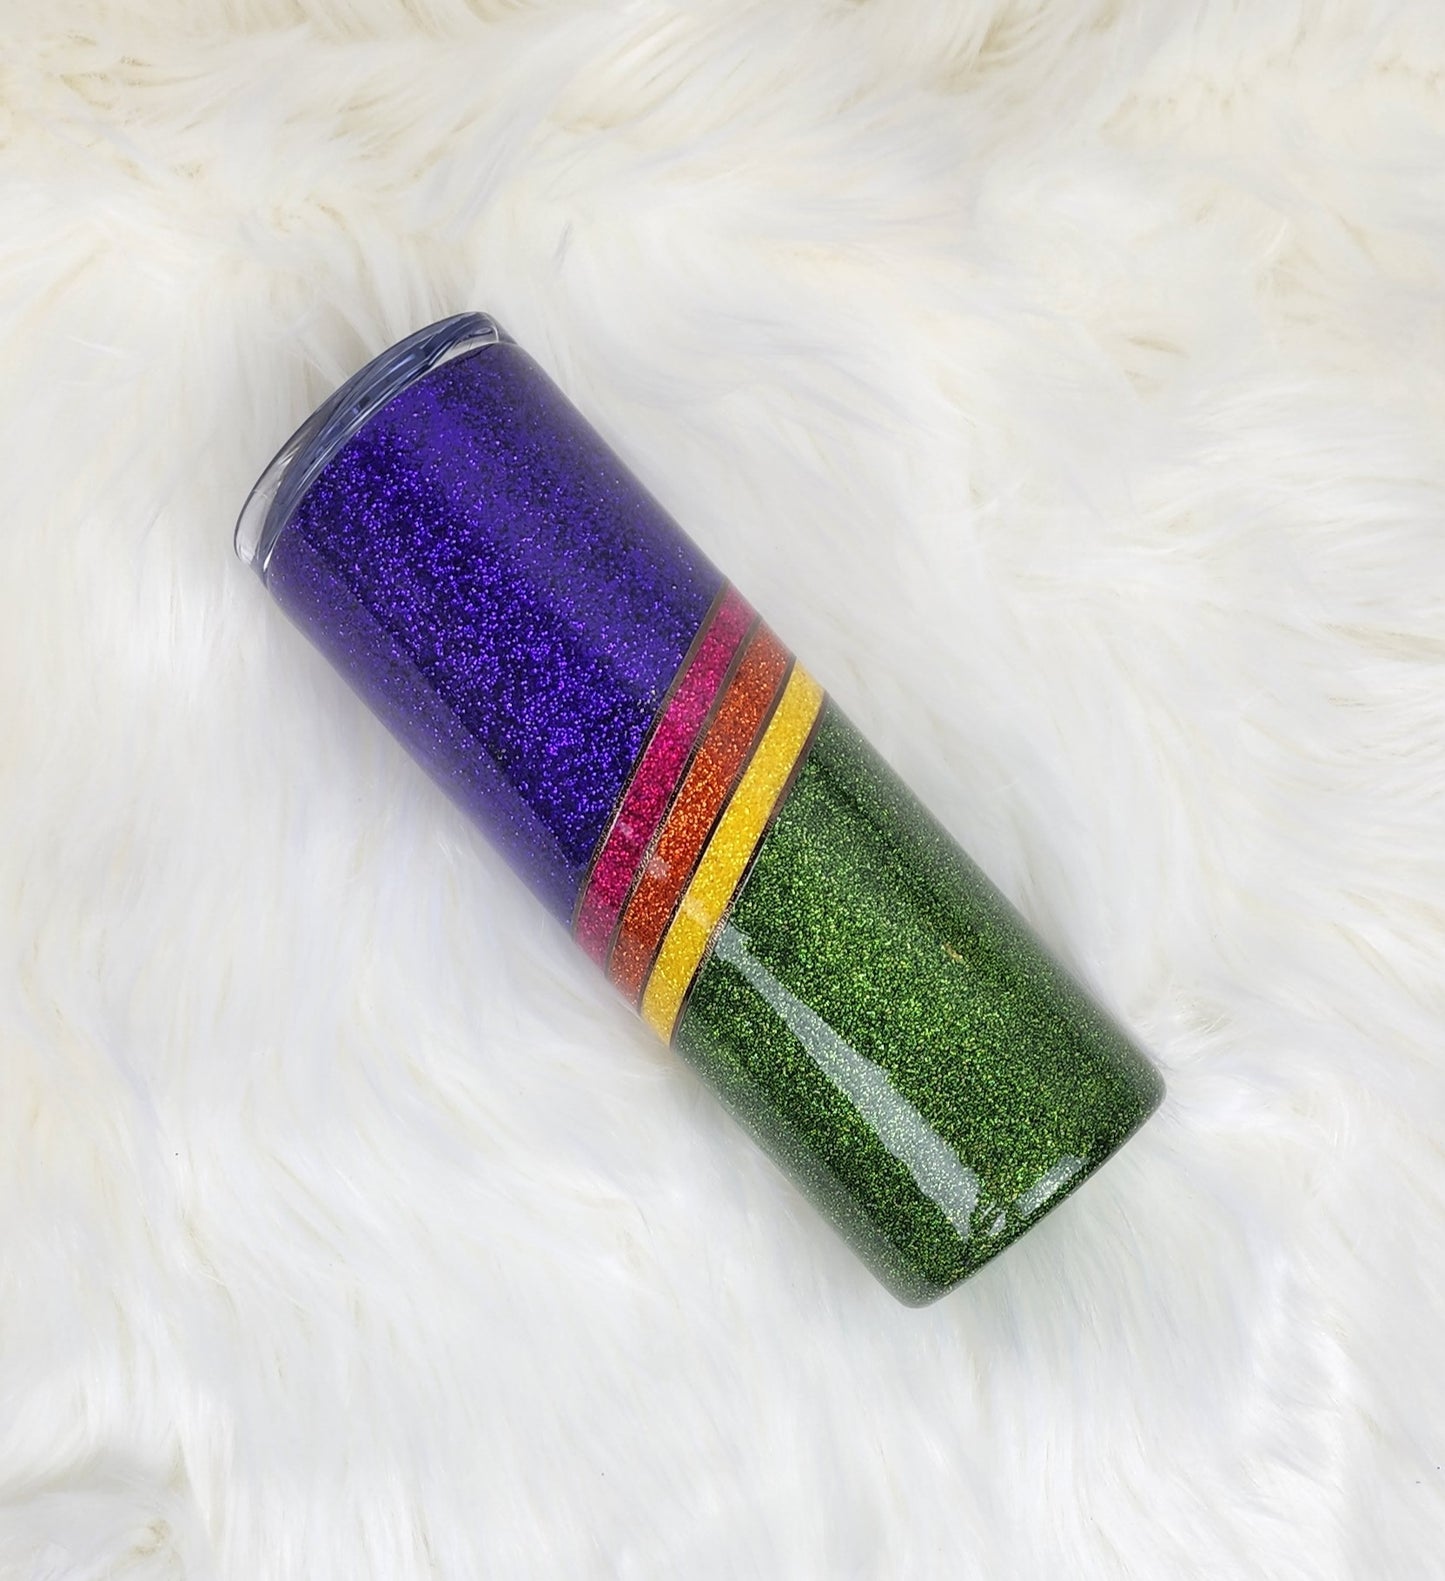 Rainbow glitter split wave tumbler. Purple and green dominant, pink, orange and yellow stripes with textured bron metallic pinstriping to separate the colours.